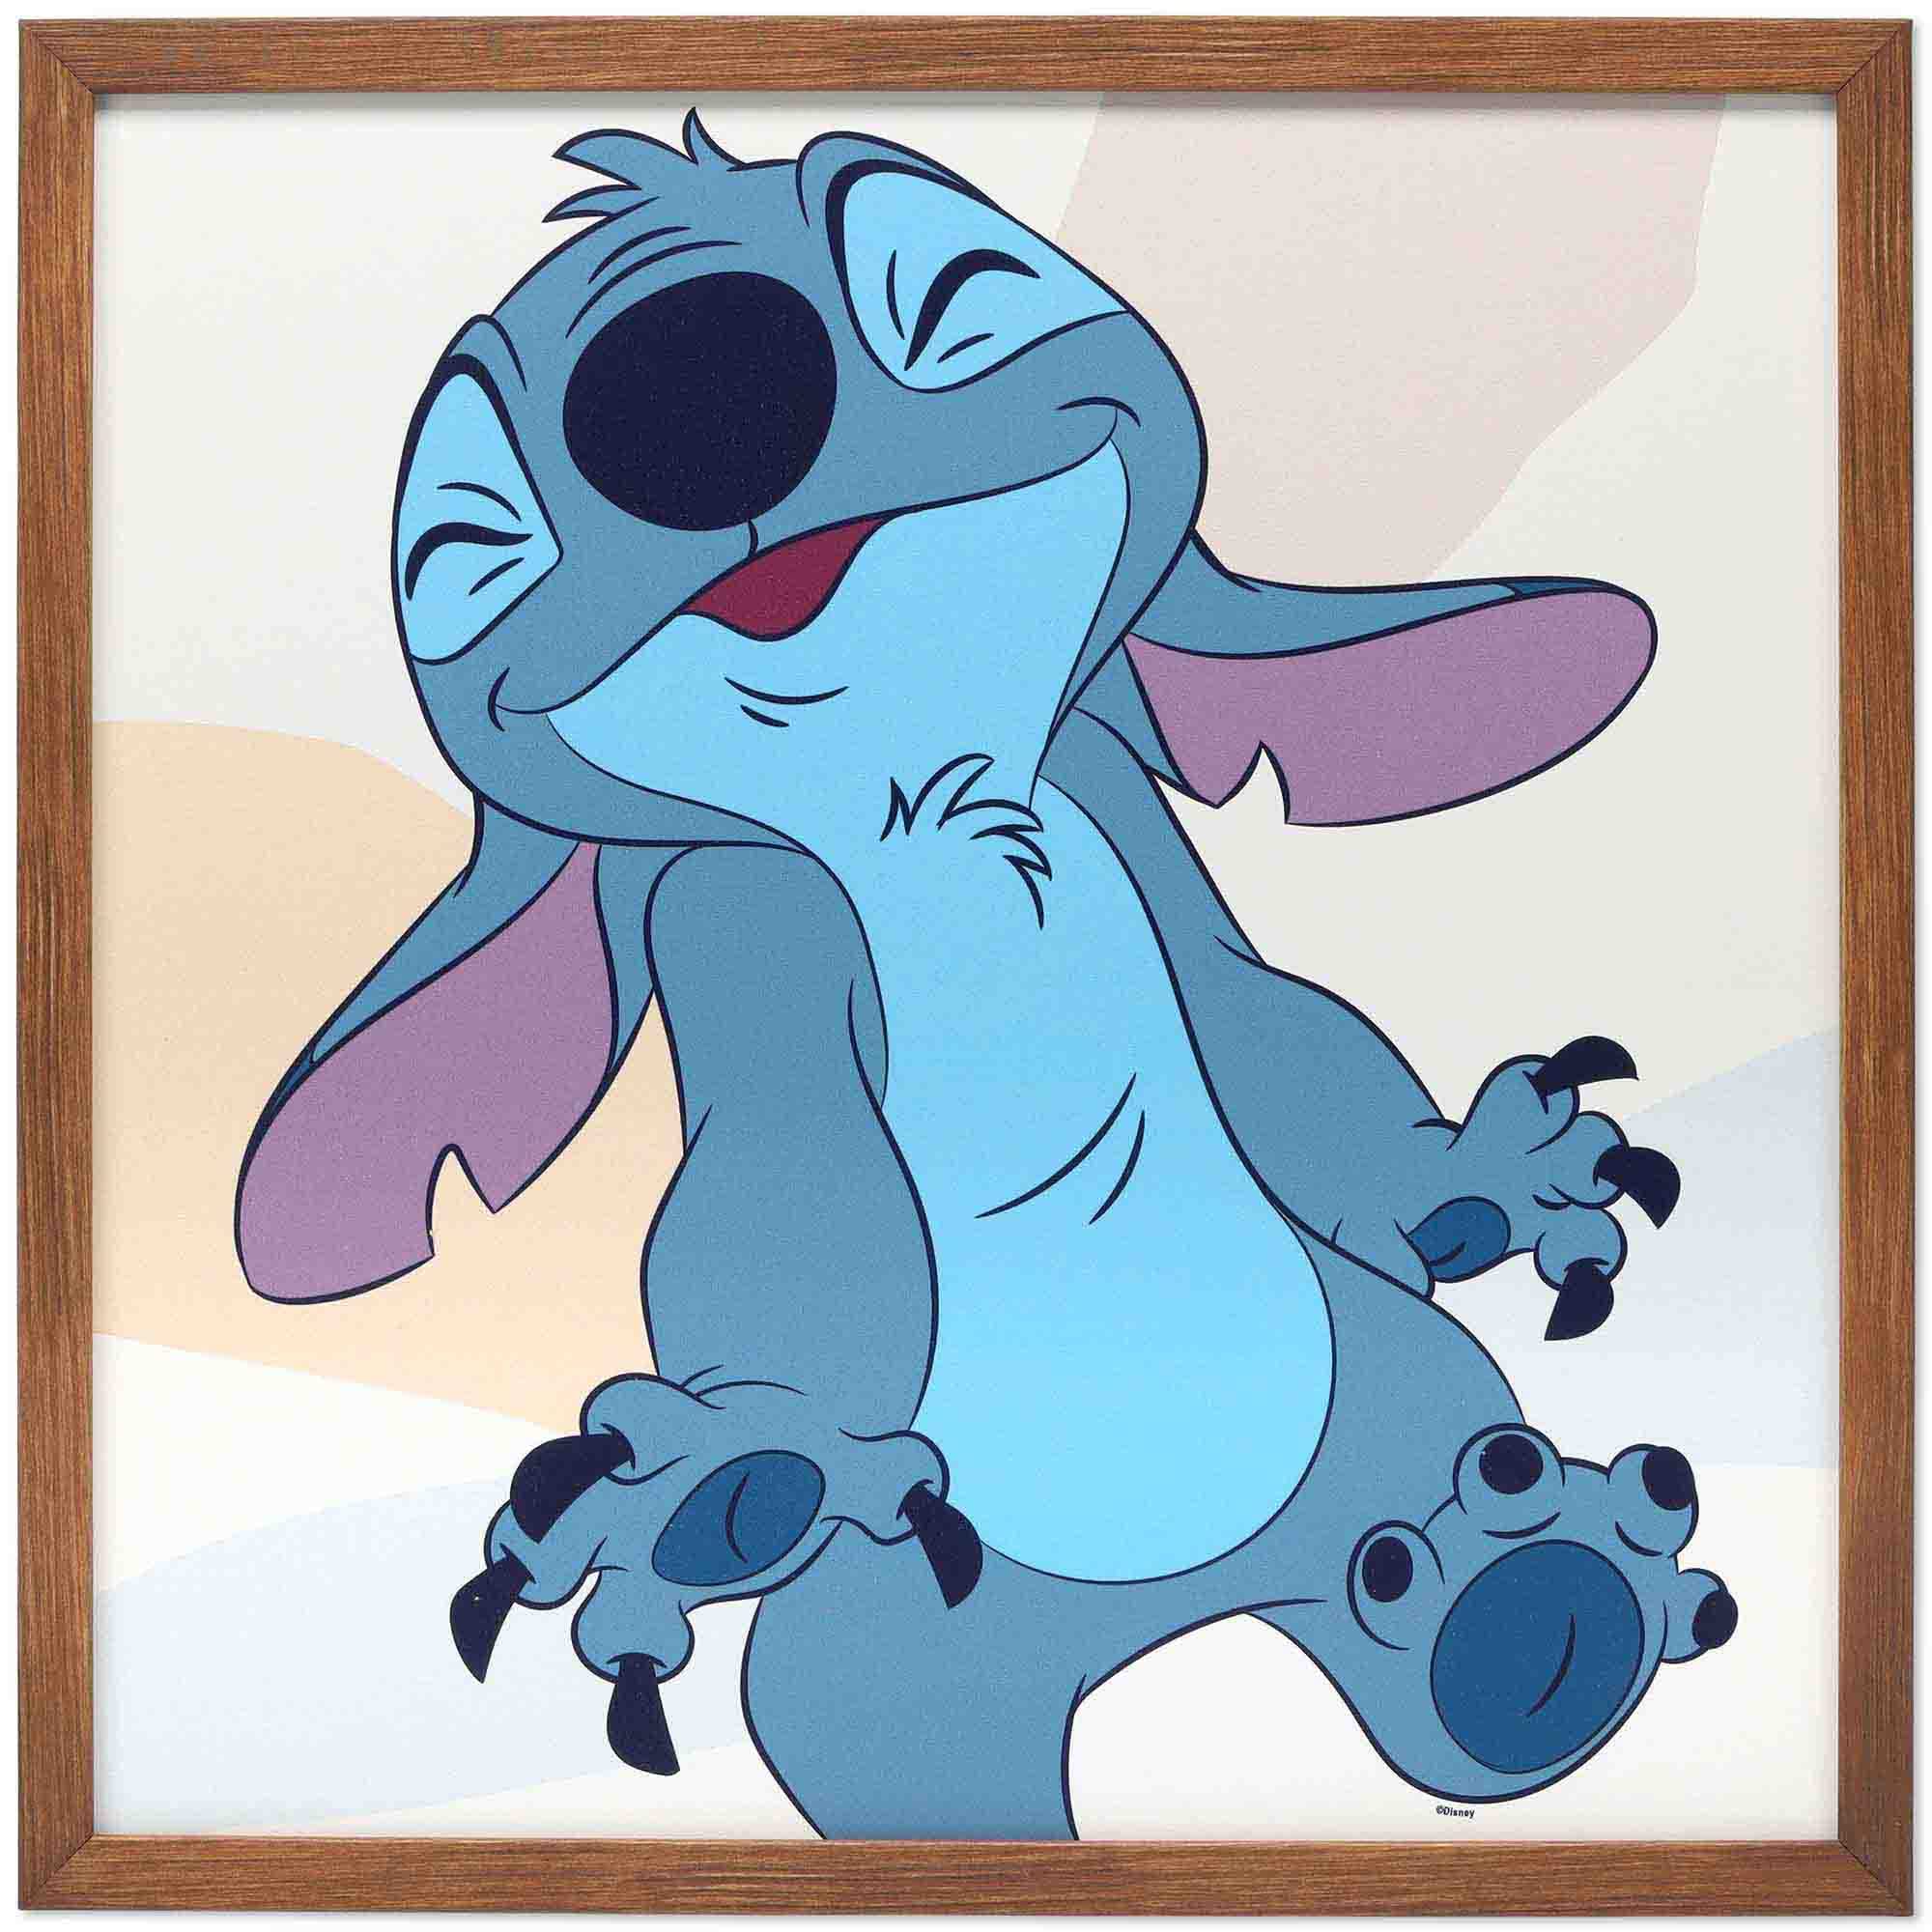 Image of a cartoon stitch character with a computer screen or coding symbols